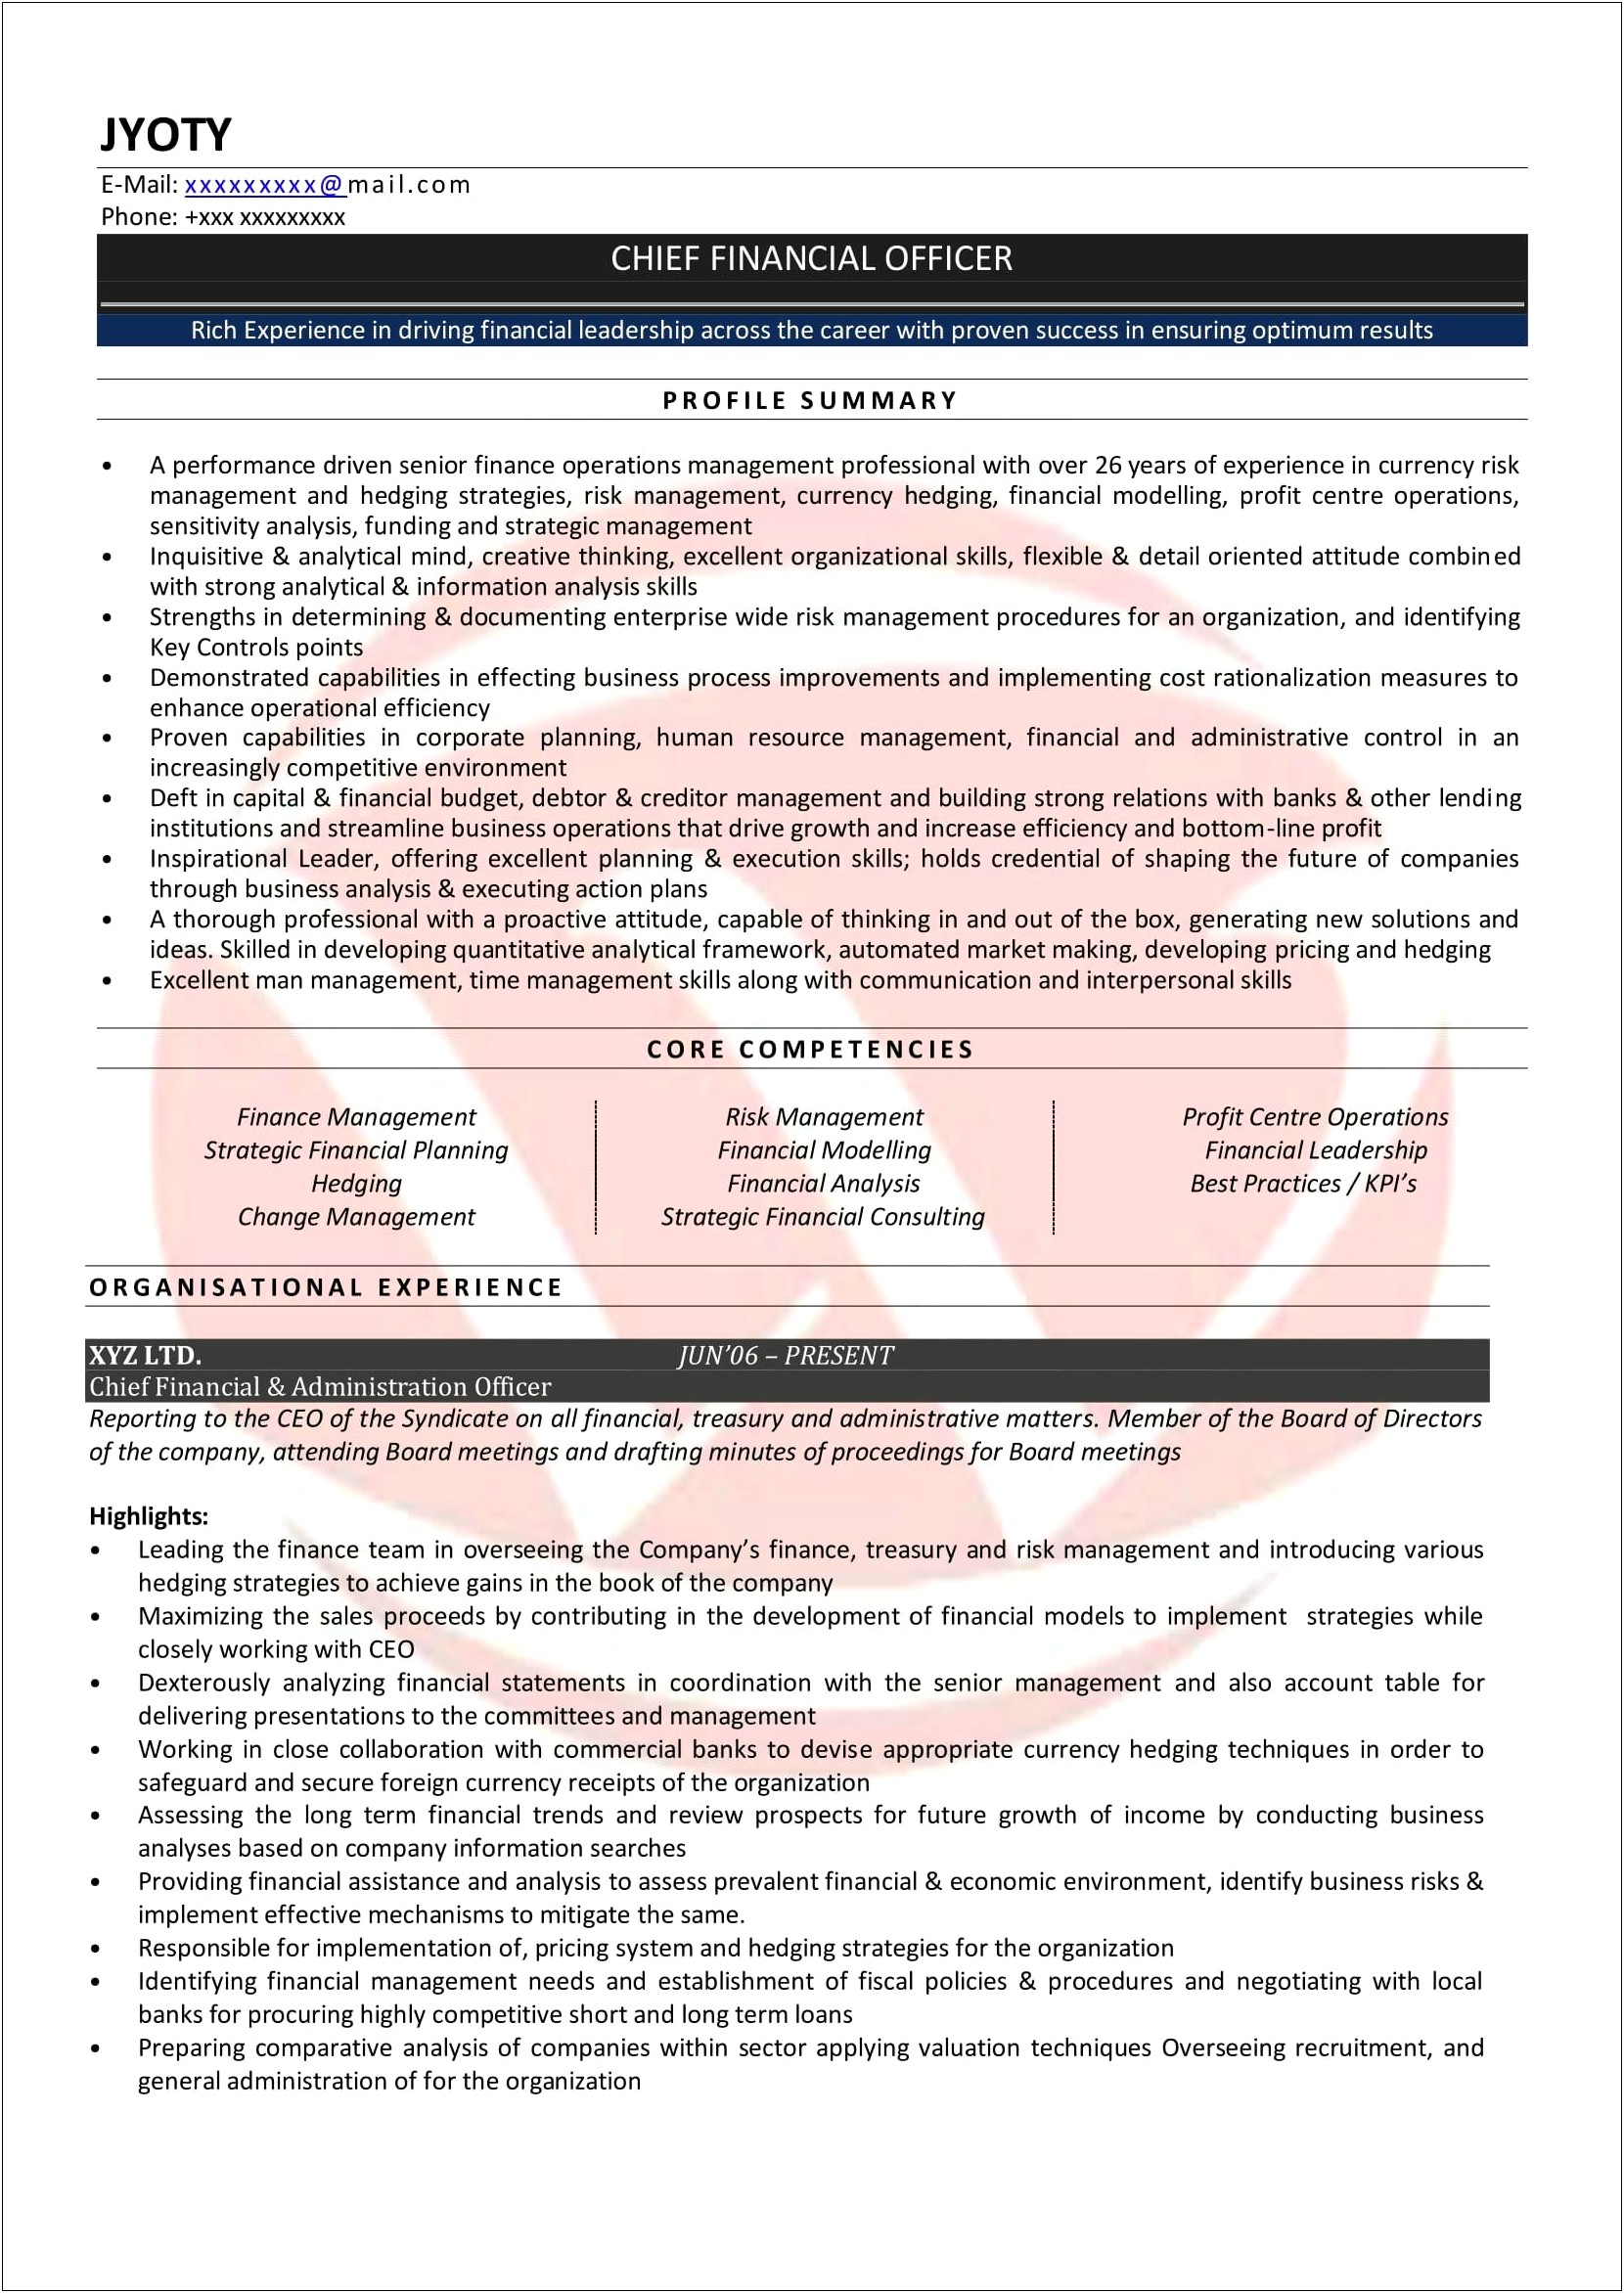 Best Sample Resume Format For Accountant